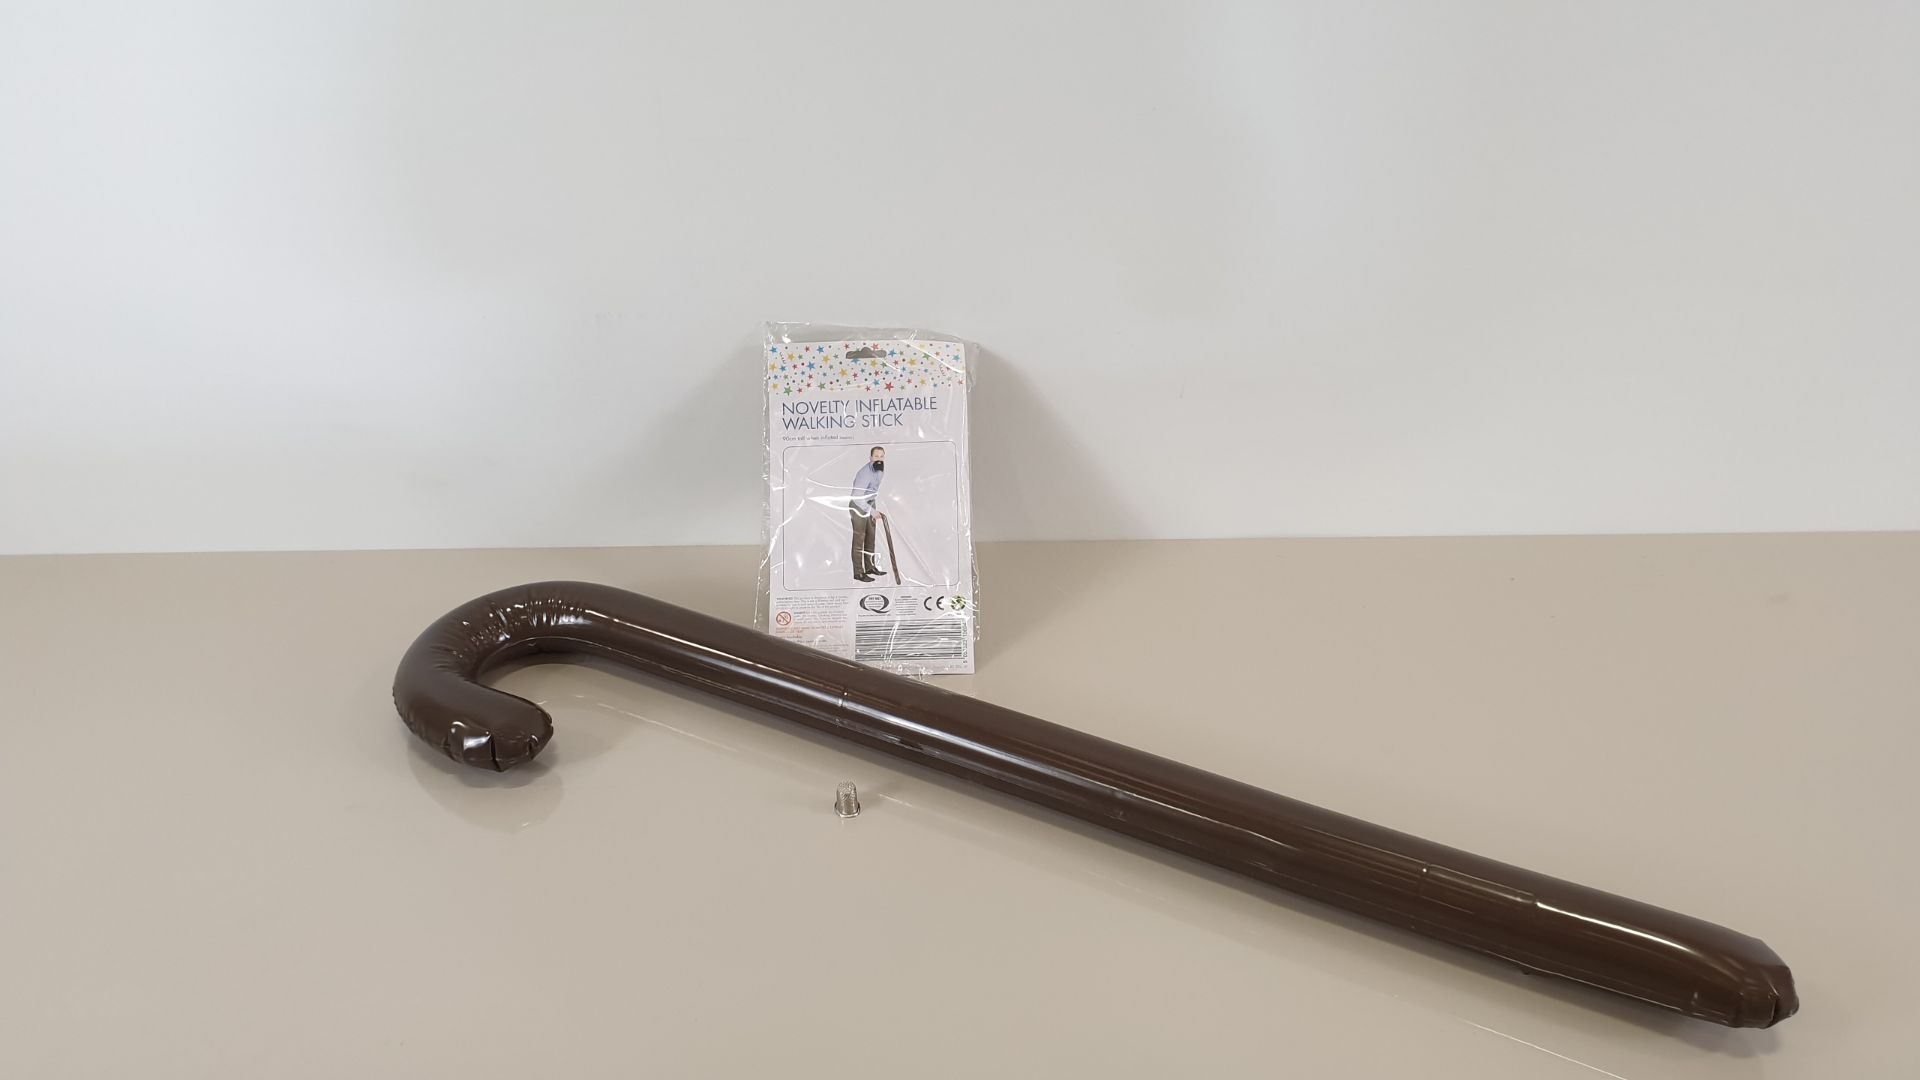 648 X NOVELTY INFLATING WALKING STICKS - BRAND NEW IN 27 CARTONS